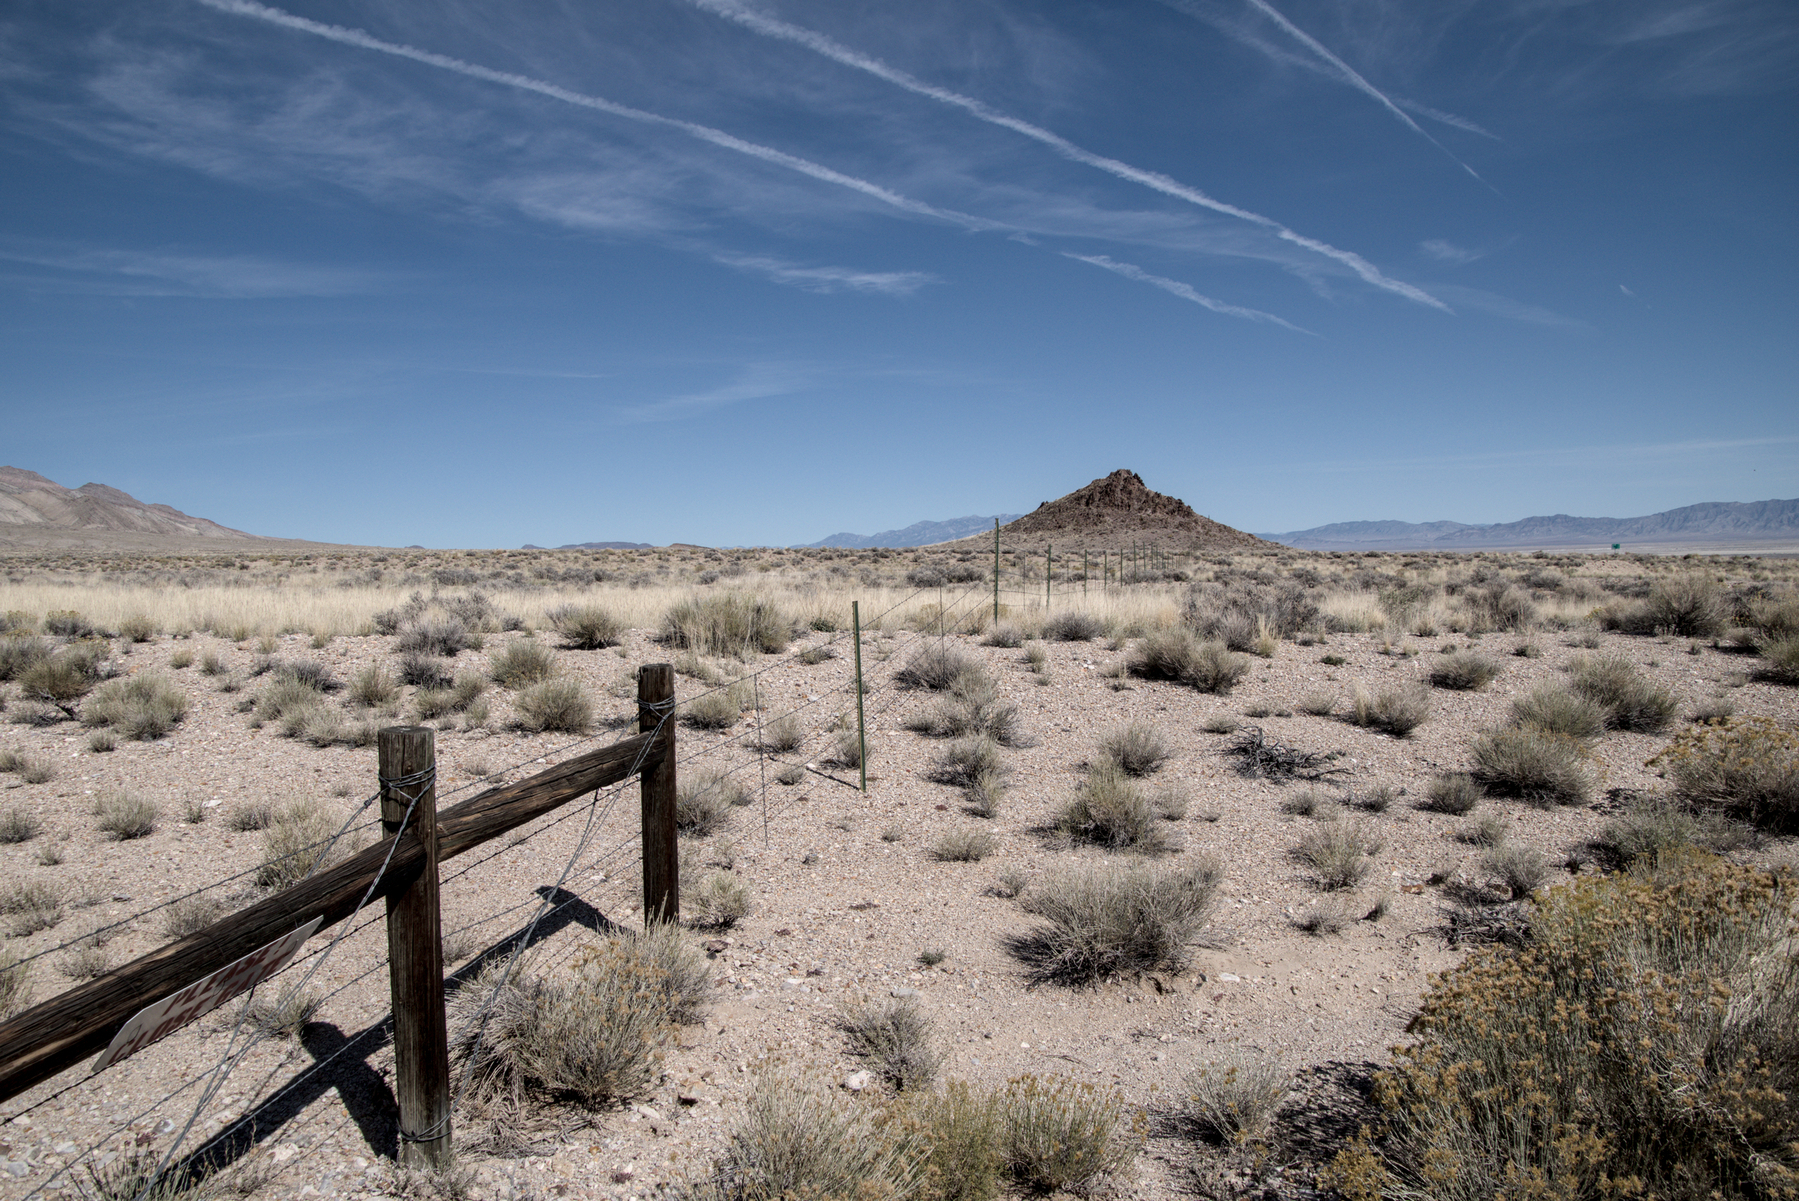 In a wide desert valley, a wooden and barbed-wire fence runs towards a cone-shaped hill in the valley. Airplane contrails in the sky parallel the fence.